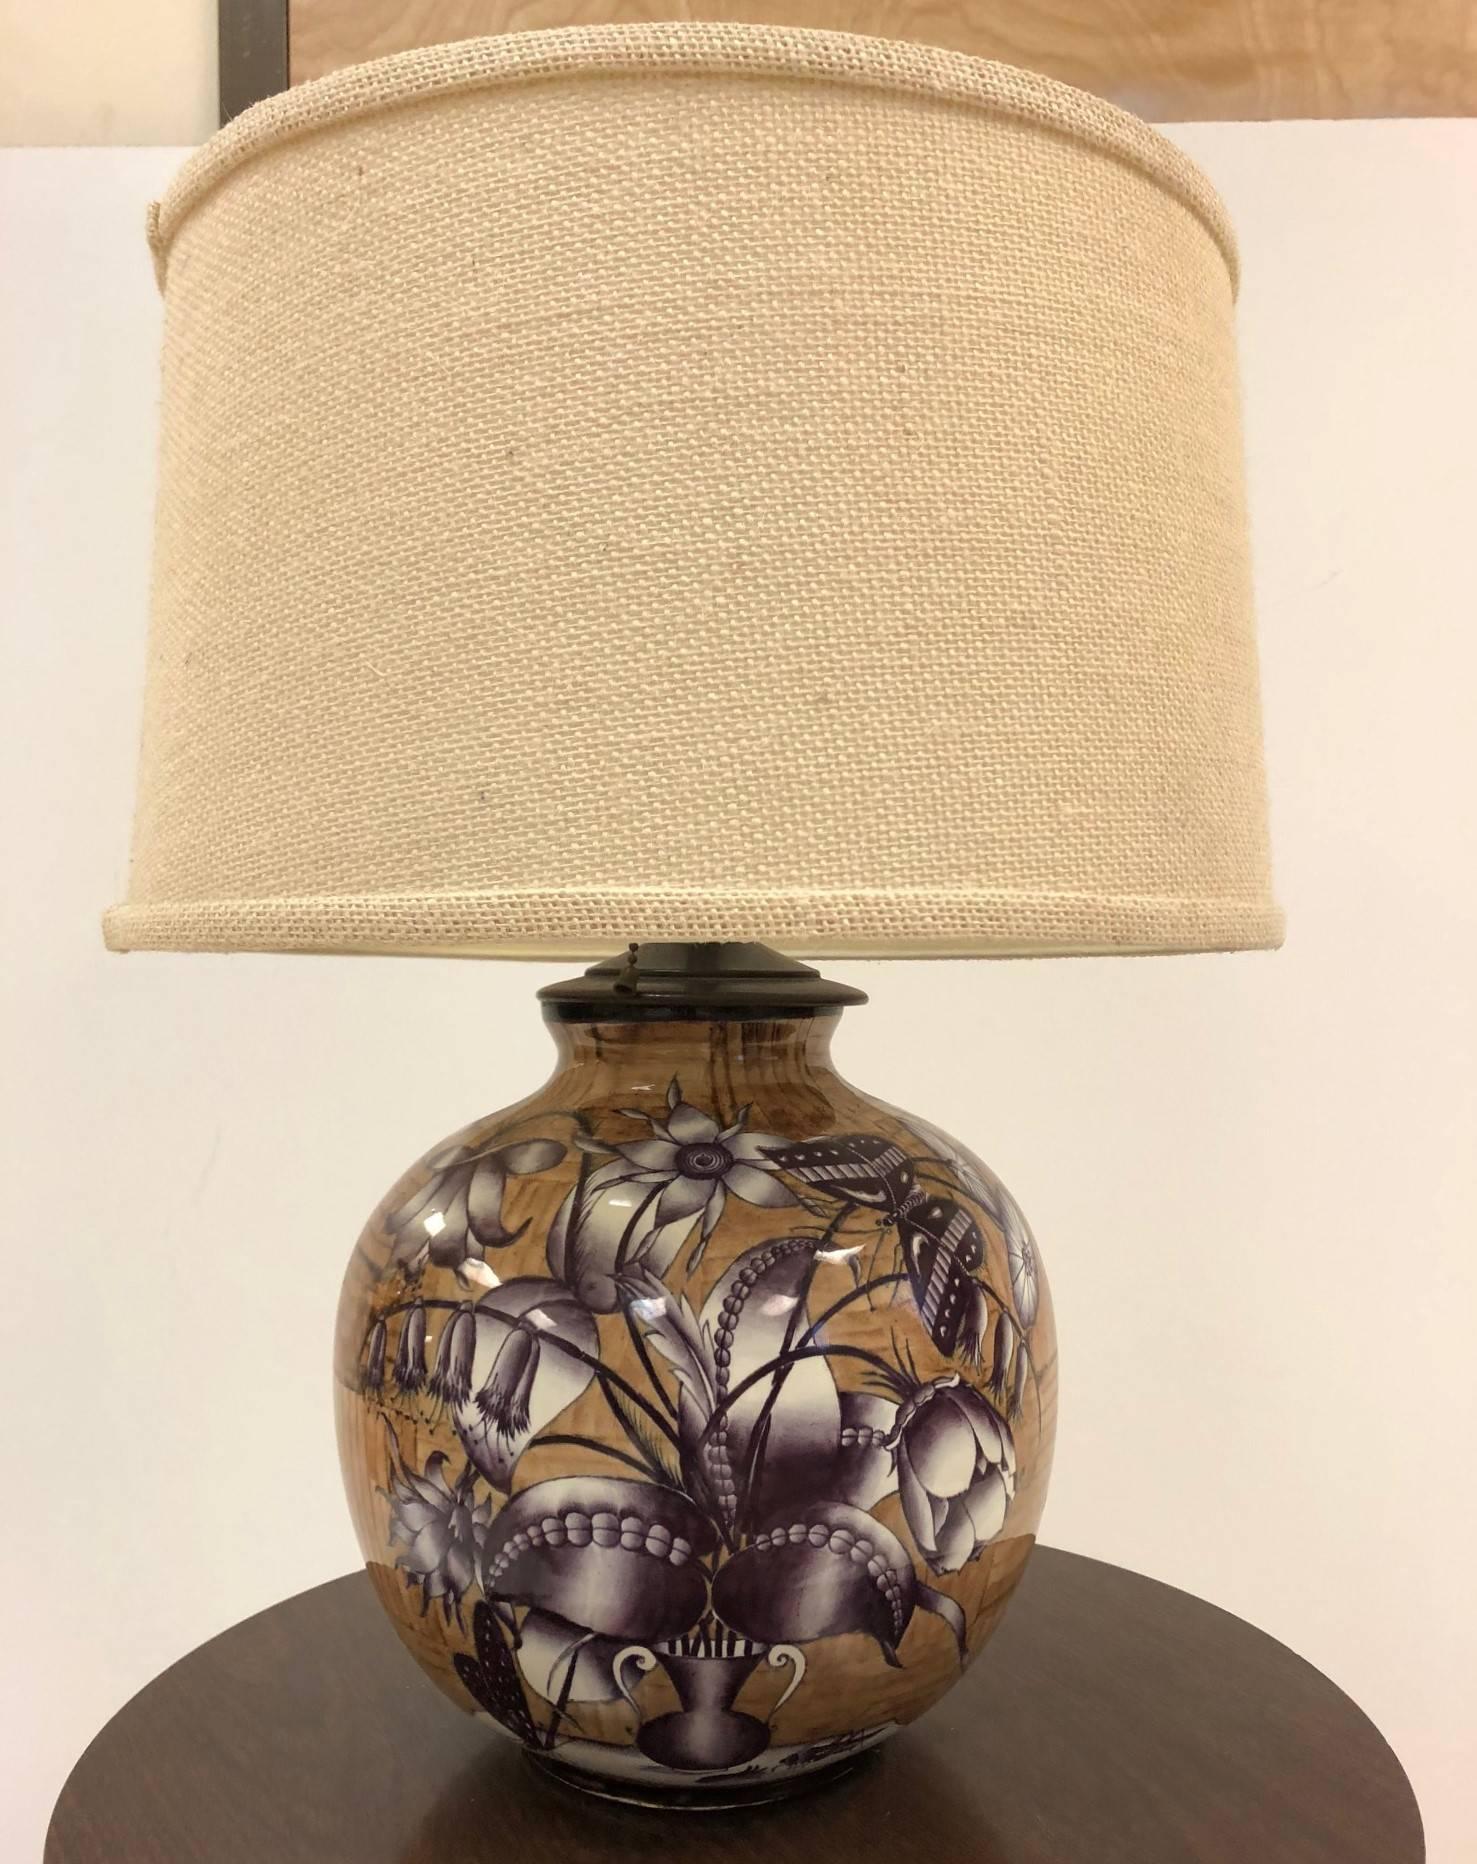 1950s, Gio Ponti for Richard Ginori ceramic lamp. The lamp is spherical and made of enameled painted with floral pattern to one side. The other side is of a bamboo pattern.